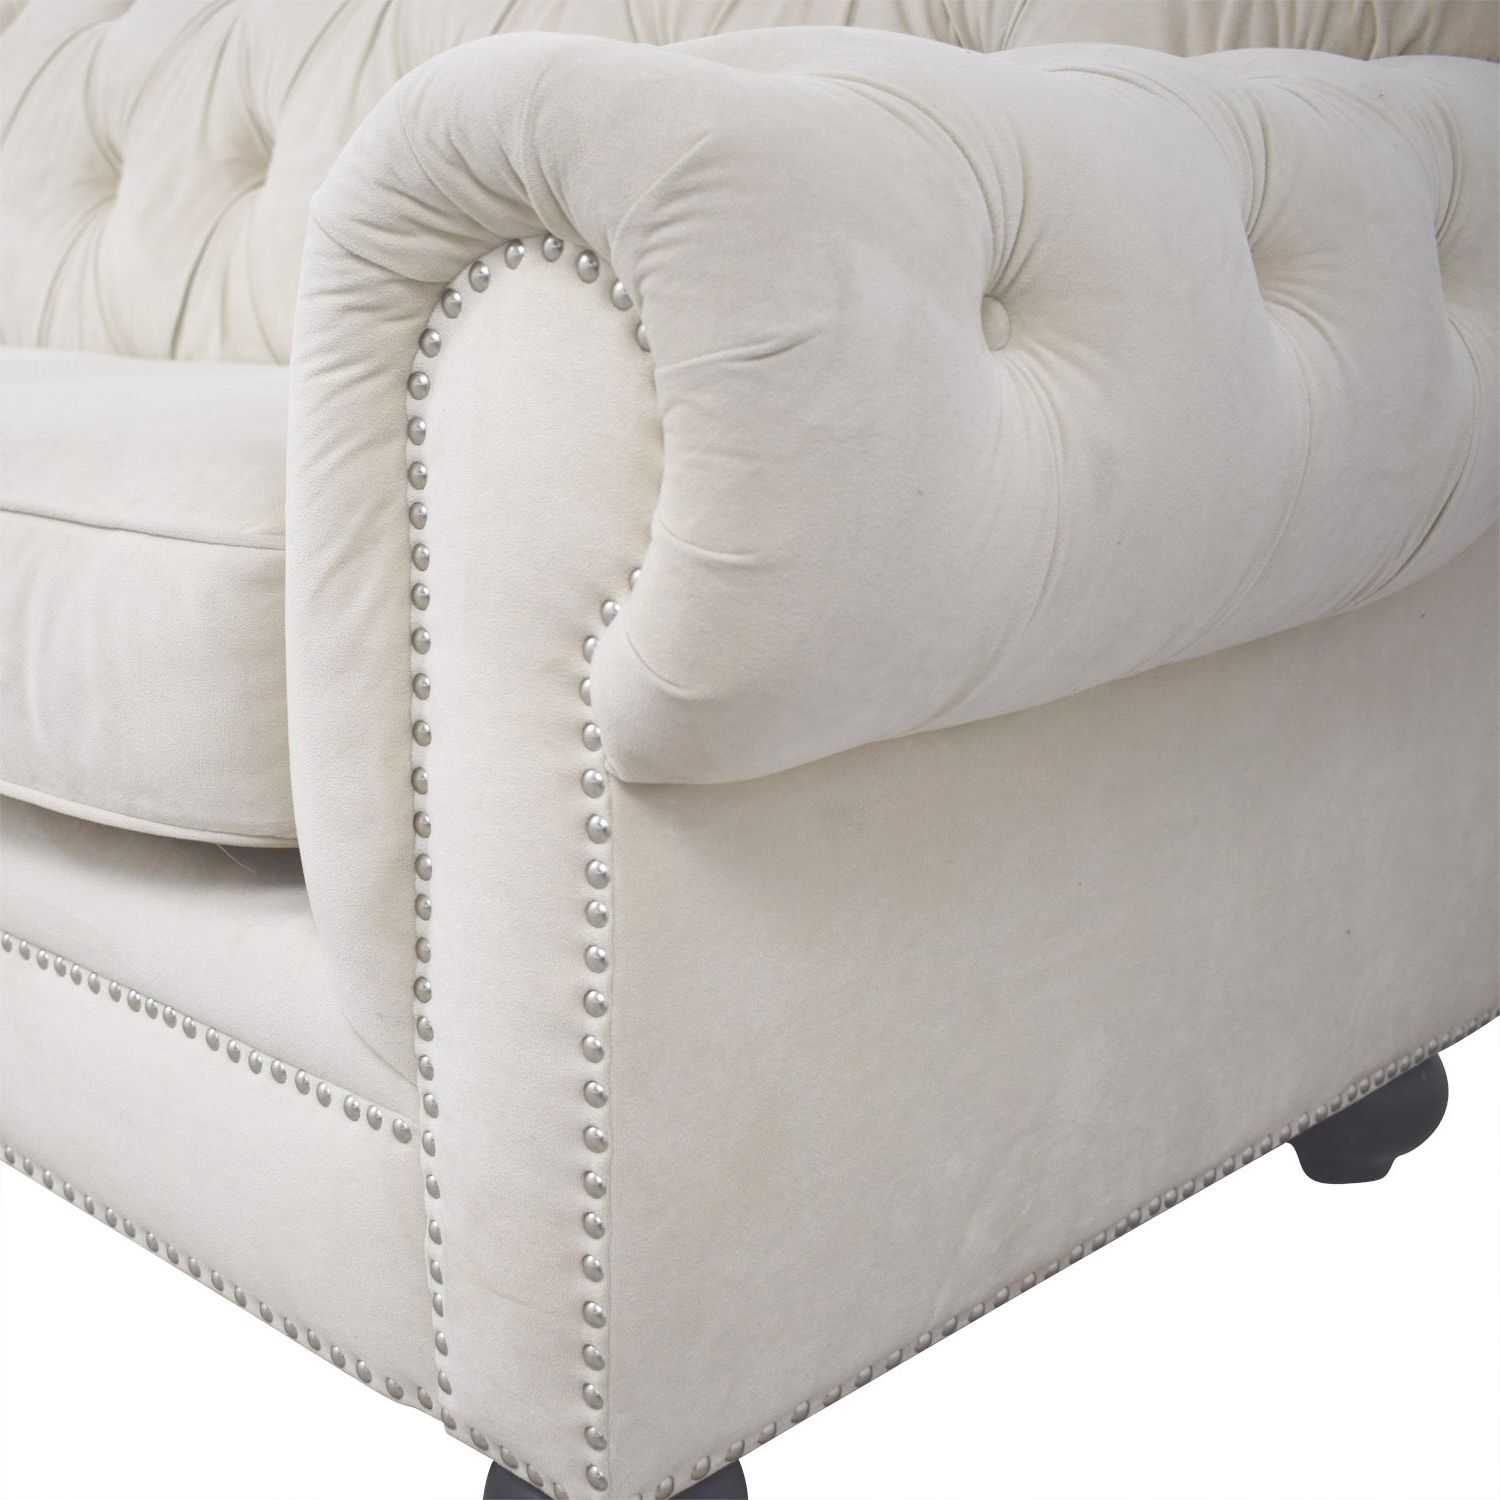 [%88% Off – Chesterfield Style Tufted Beige Velvet Sofa / Sofas Inside Trendy Elegant Beige Velvet Sofas|elegant Beige Velvet Sofas With Regard To Famous 88% Off – Chesterfield Style Tufted Beige Velvet Sofa / Sofas|newest Elegant Beige Velvet Sofas With 88% Off – Chesterfield Style Tufted Beige Velvet Sofa / Sofas|popular 88% Off – Chesterfield Style Tufted Beige Velvet Sofa / Sofas Within Elegant Beige Velvet Sofas%] (View 3 of 15)